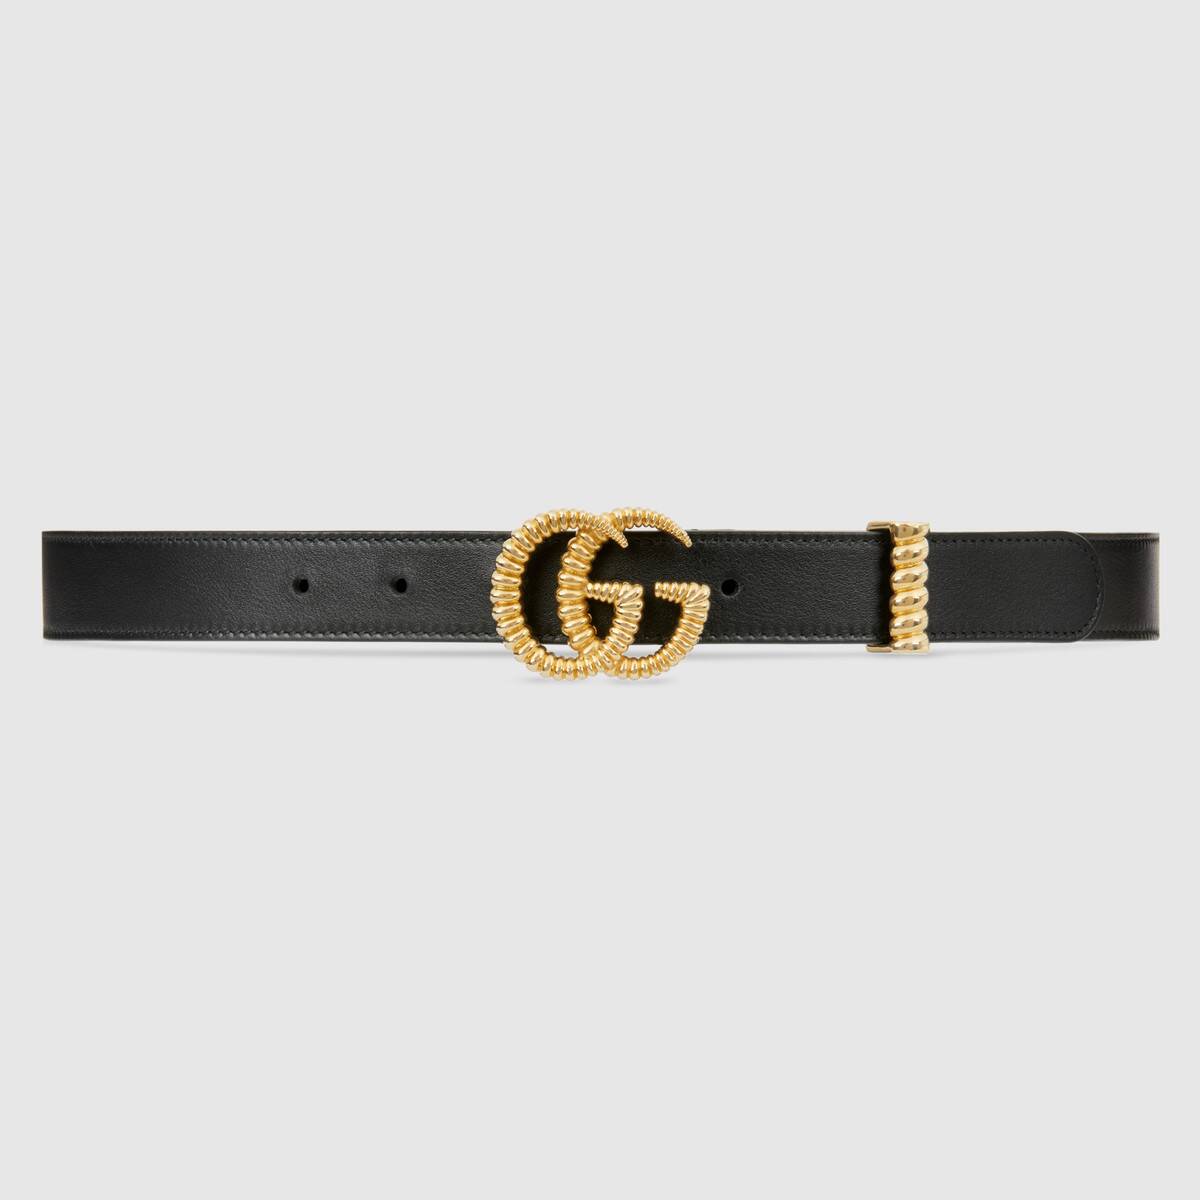 Emtalks: Gucci Belt Buying - Gucci Belt Sizing Guide And Review